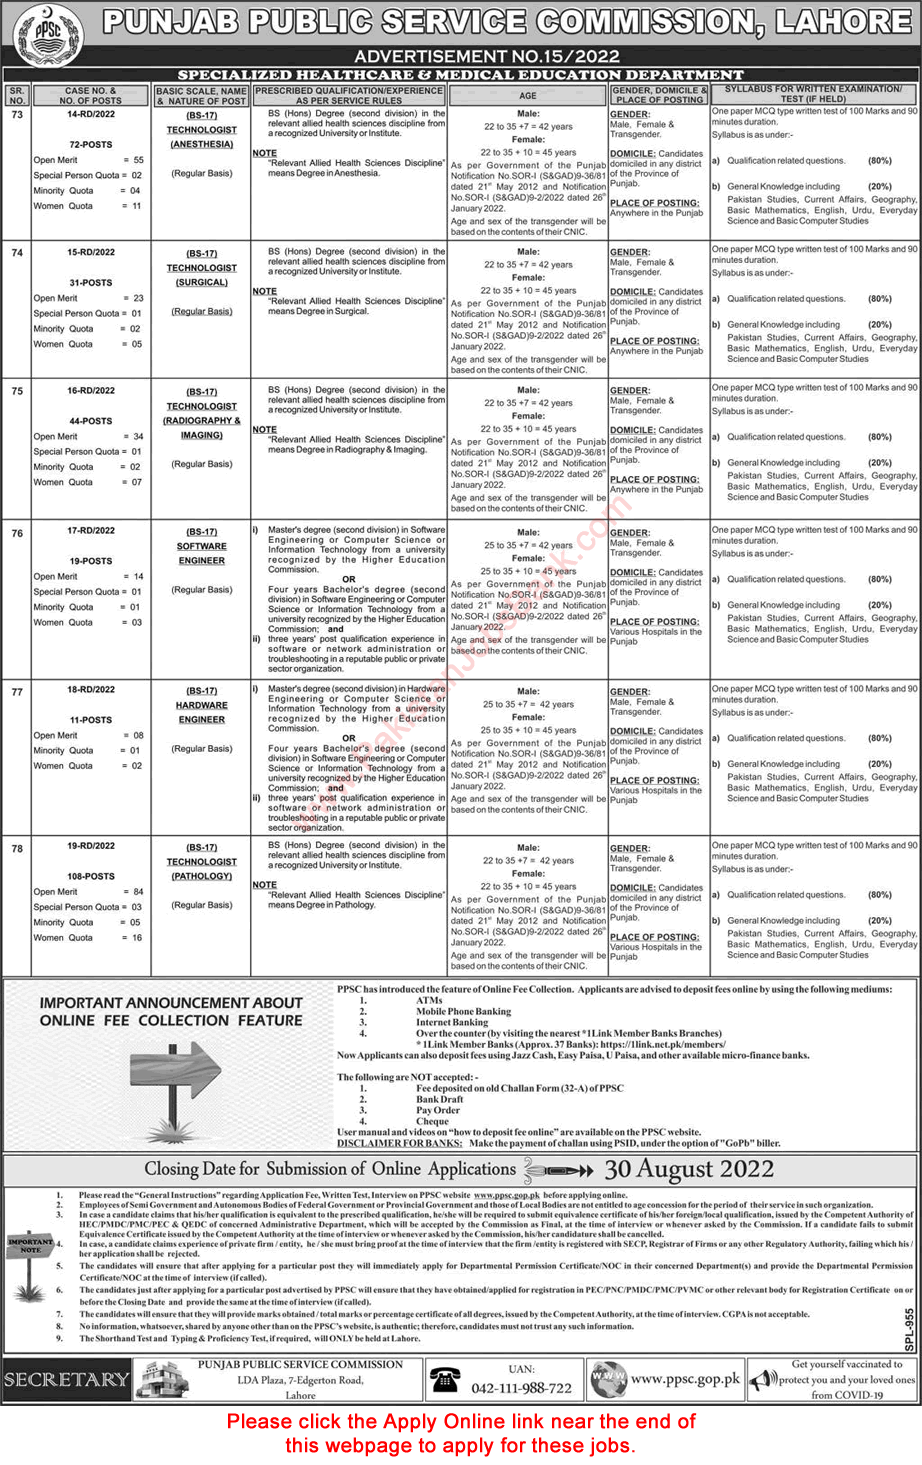 Specialized Healthcare and Medical Education Department Punjab Jobs August 2022 PPSC Apply Online Technologists & Others Latest